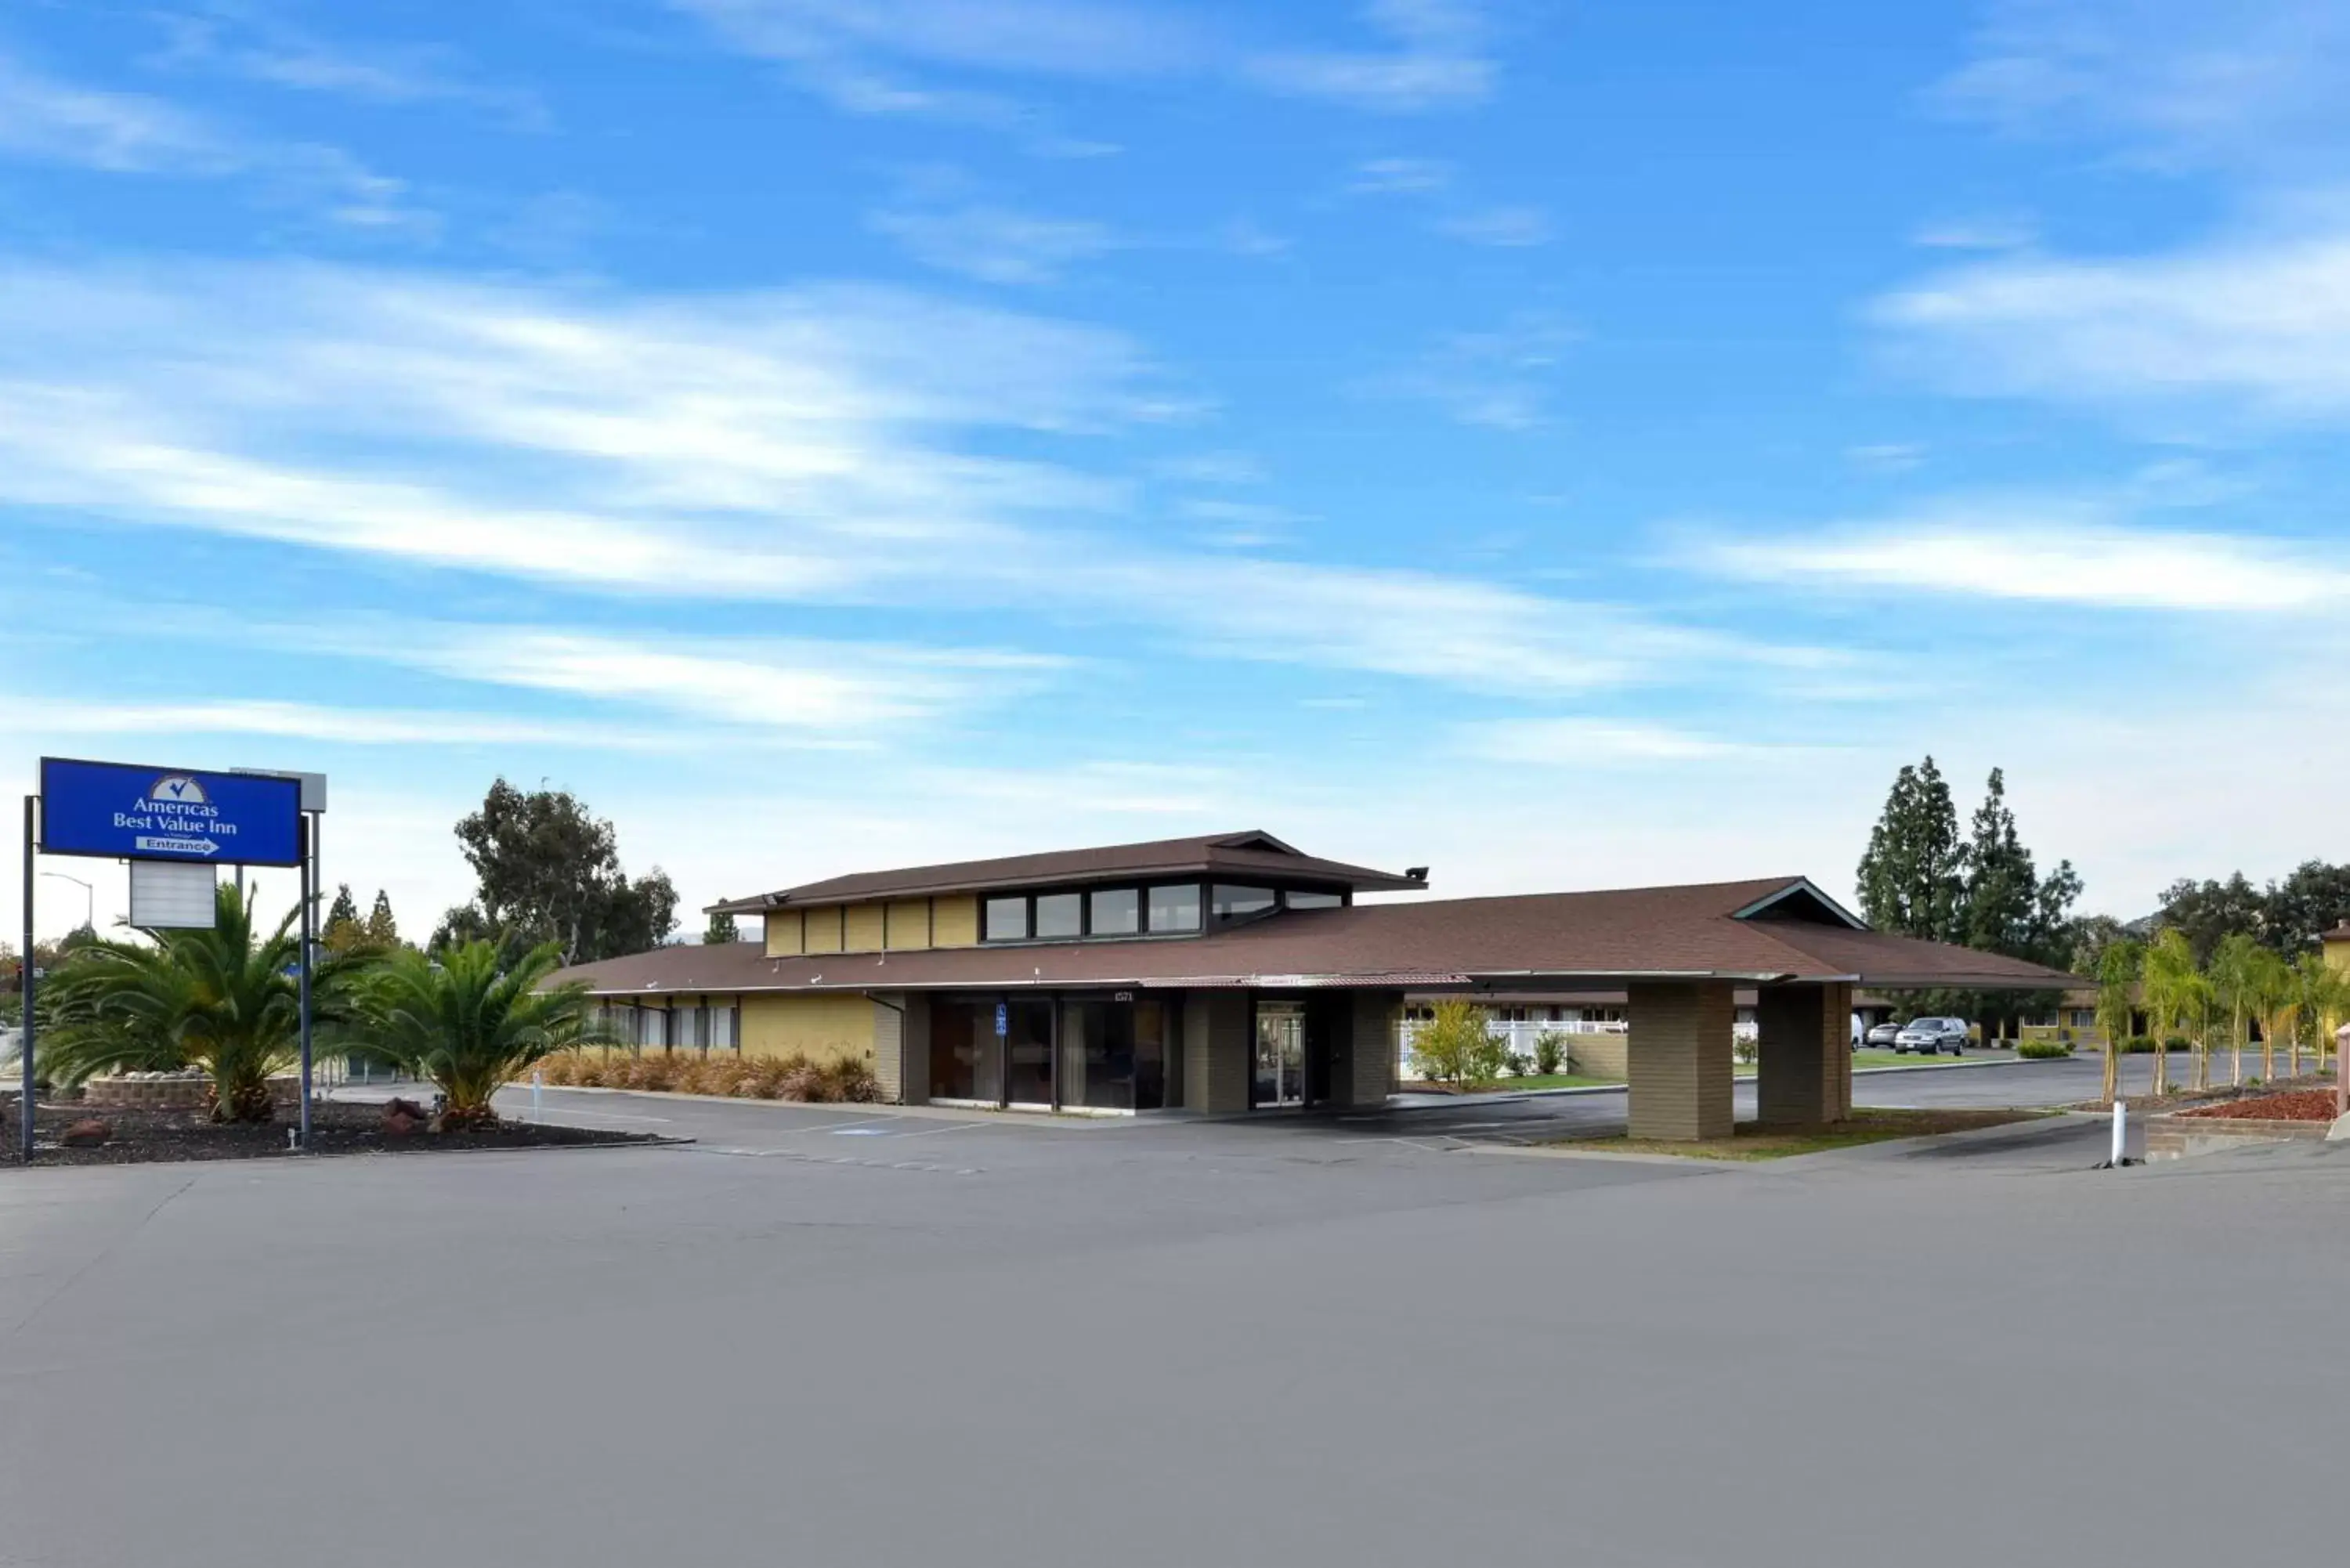 Facade/entrance, Property Building in Americas Best Value Inn Vacaville